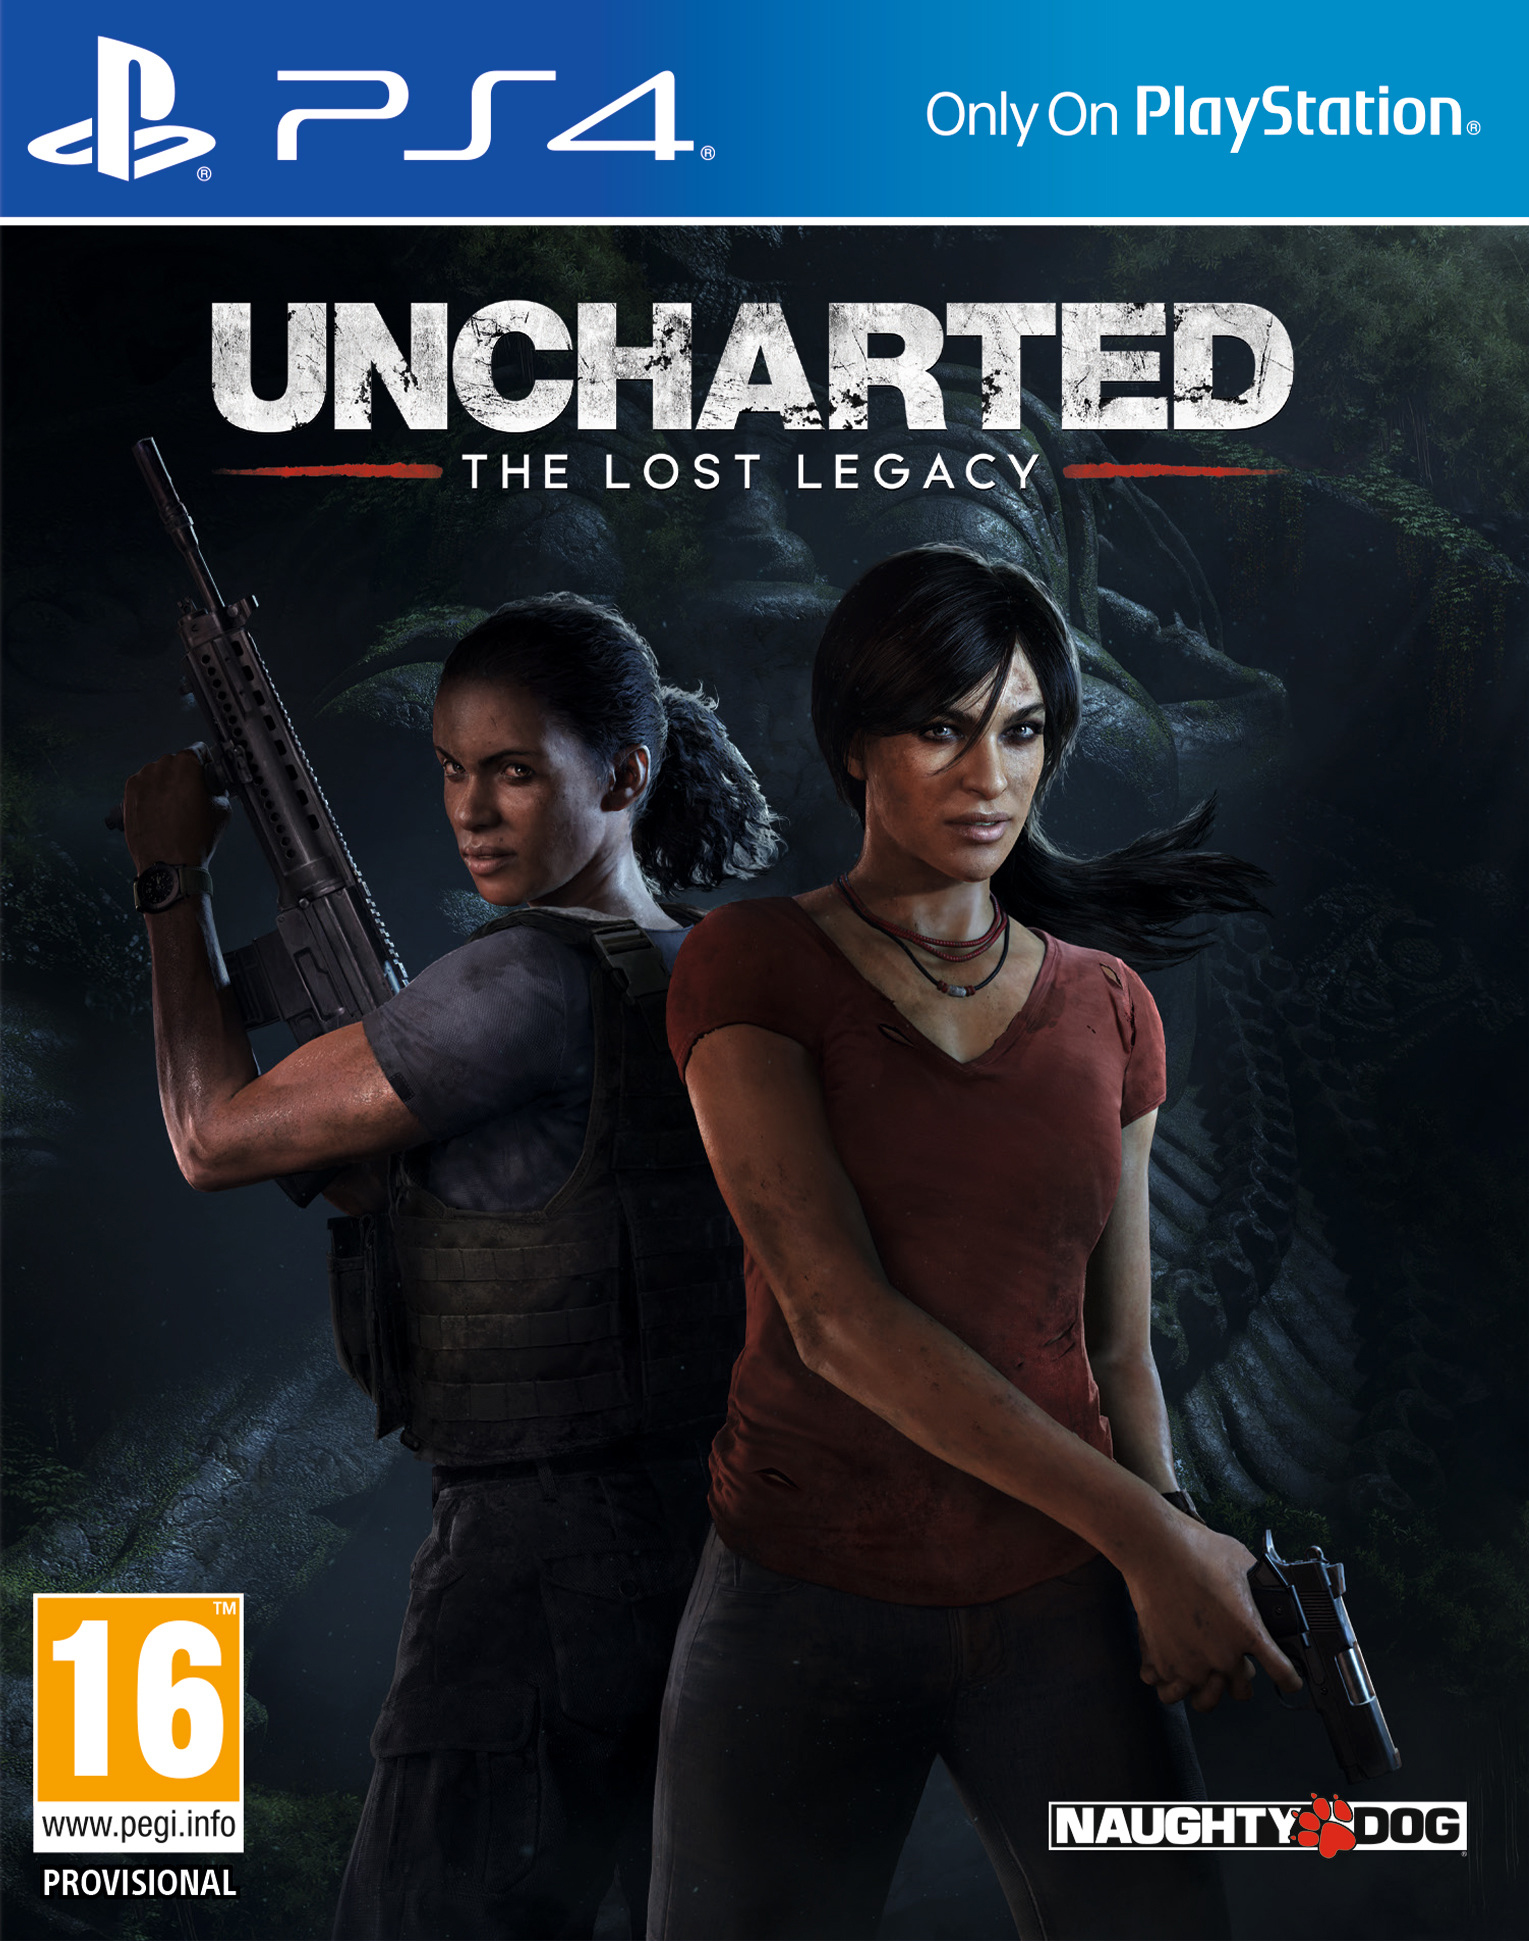 Uncharted: The Lost Legacy / Uncharted: Утраченное Наследие [PS4 Exclusive] 5.05 / 6.72 / 7.02 [EUR] (2017) [Русский/Английский] (v1.08)